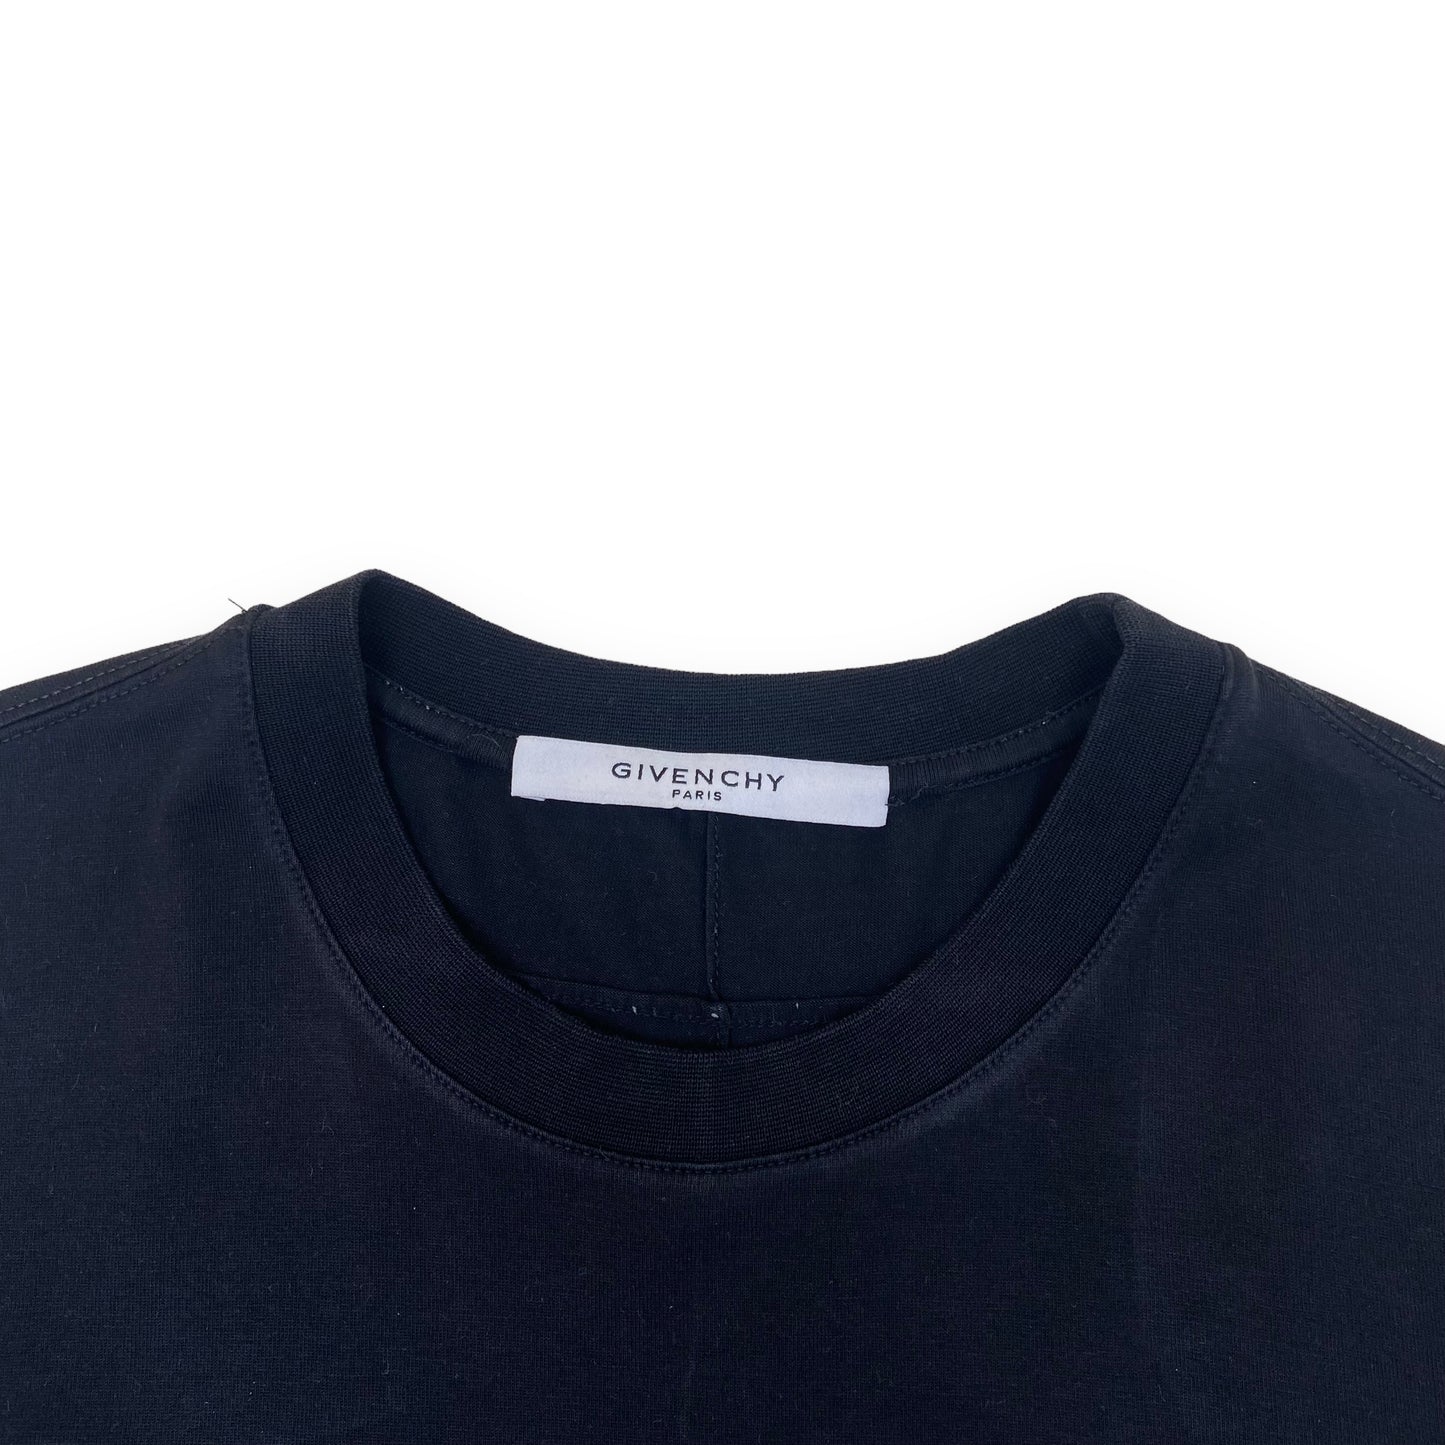 GIVENCHY ‘POWER OF LOVE’ T-SHIRT BLACK XS